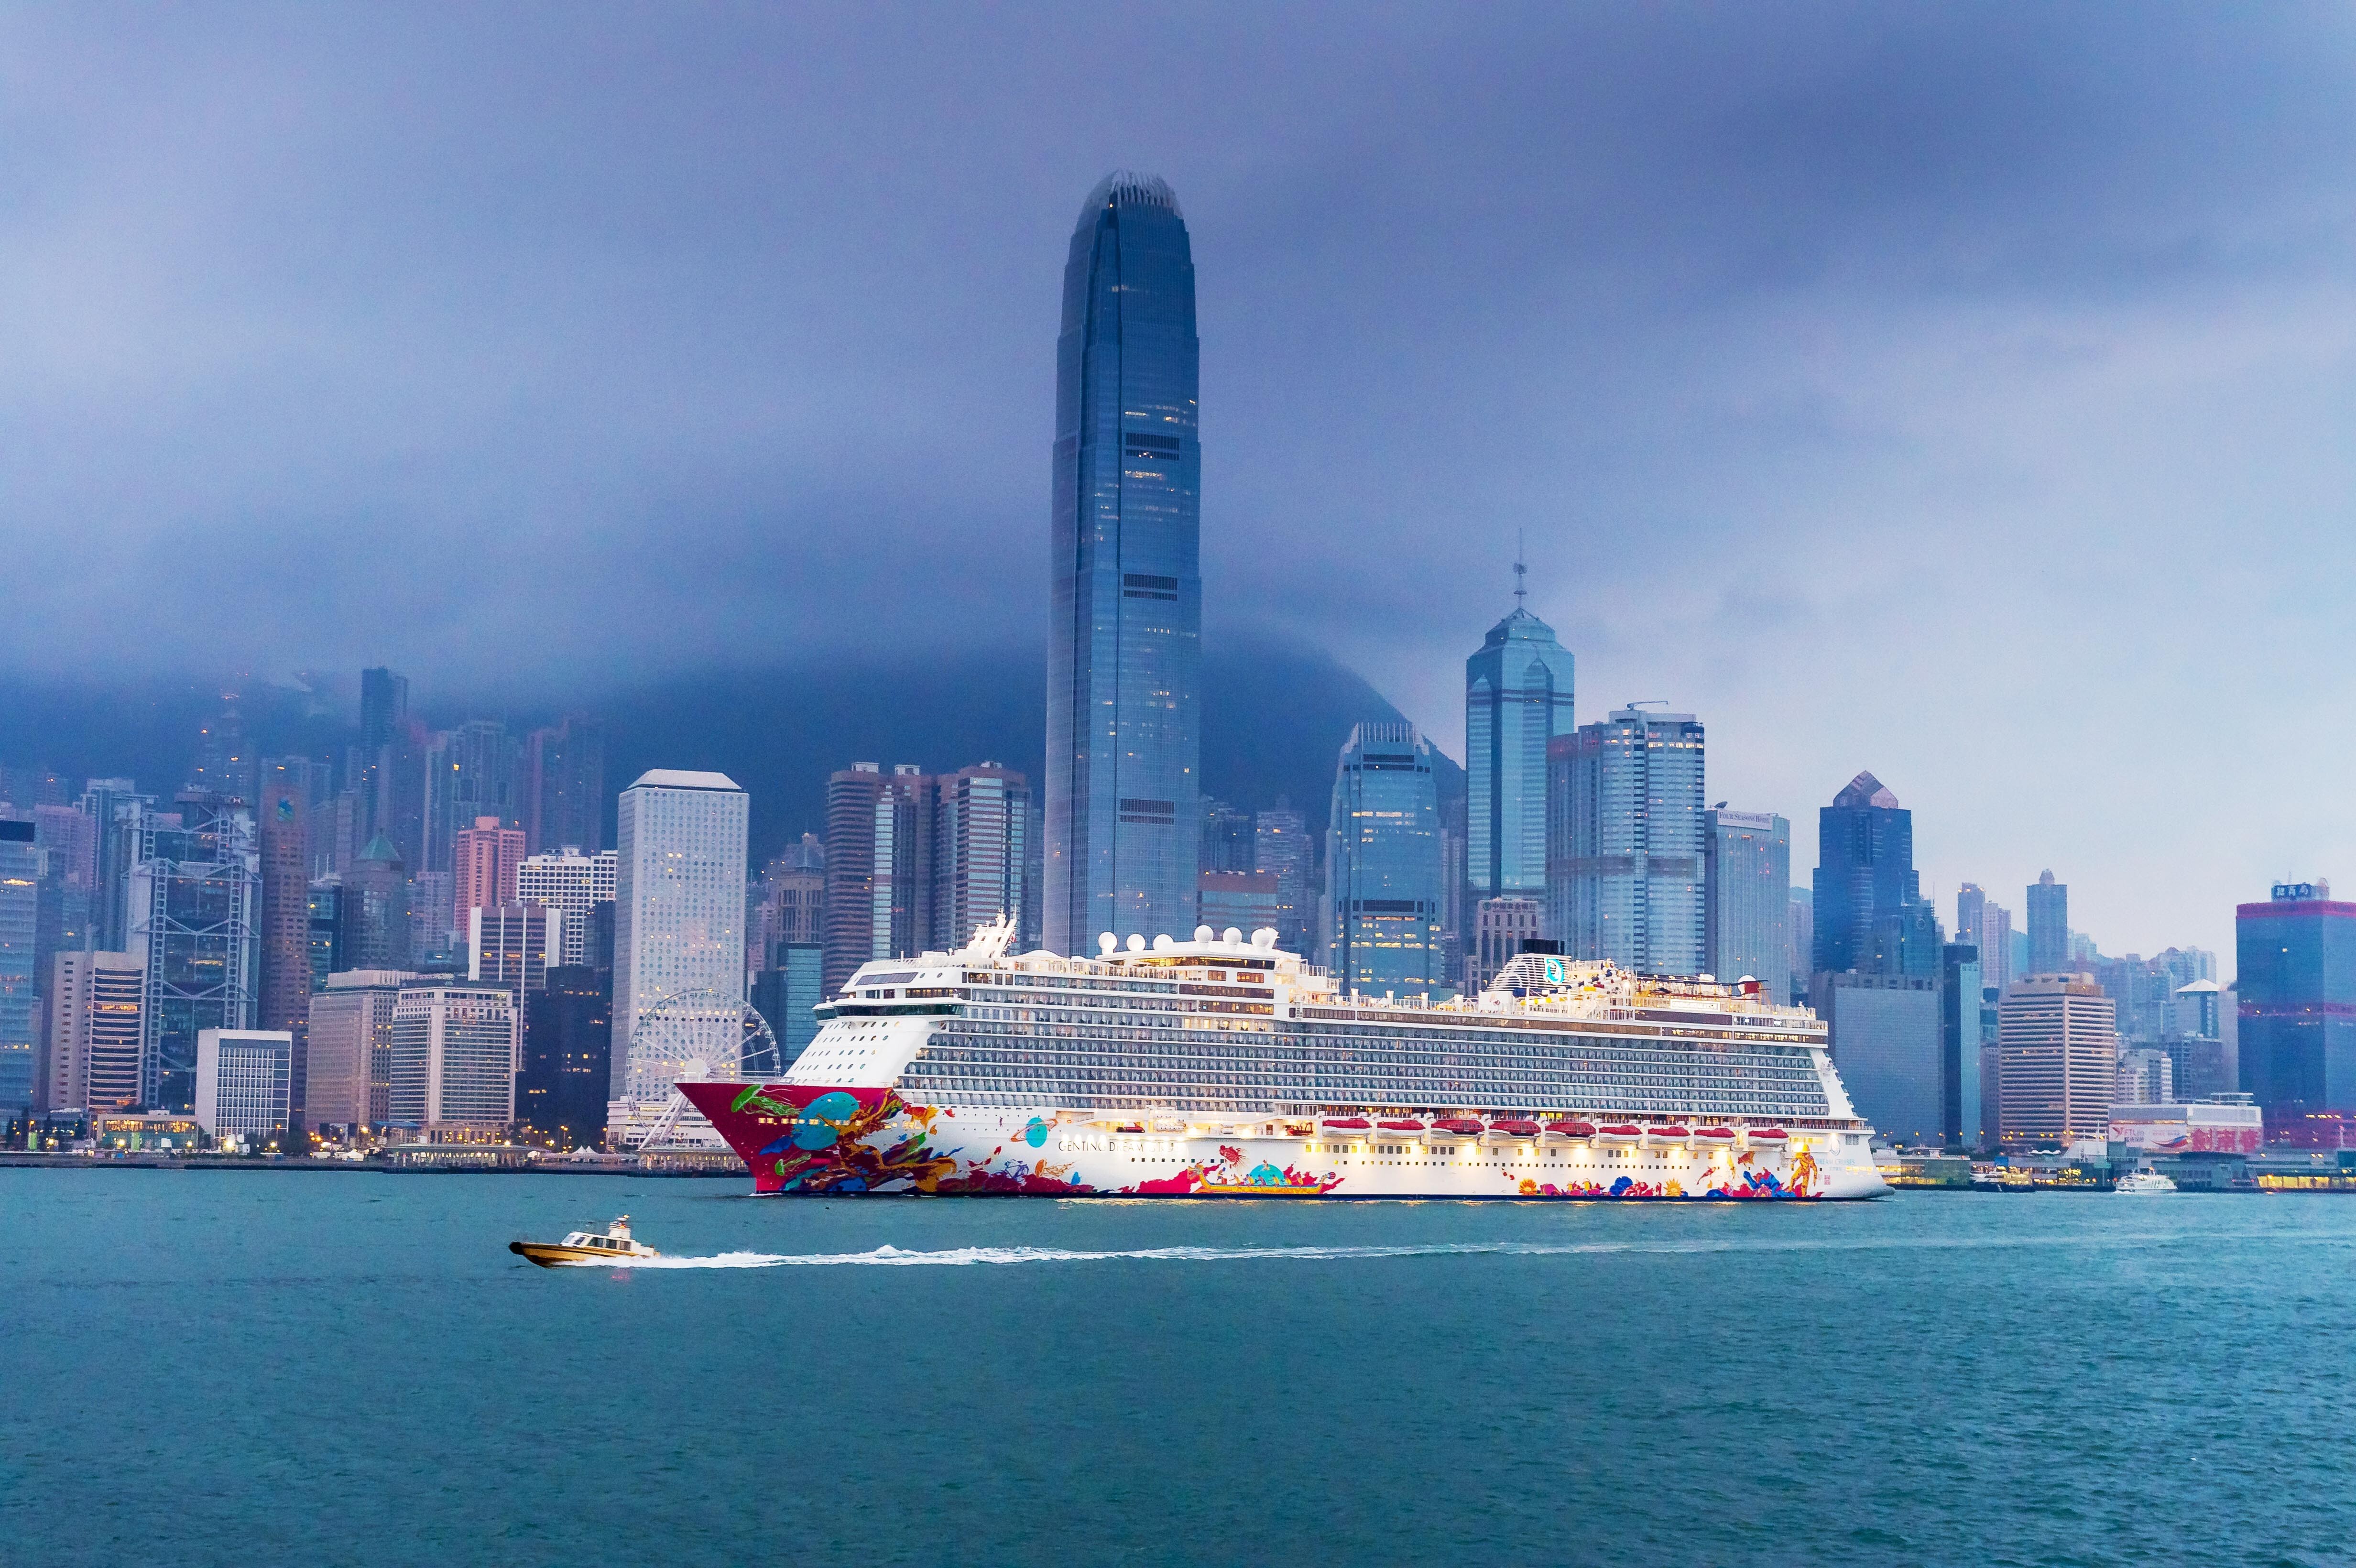 The cruise operator will launch its first ‘seacation’ aboard the Genting Dream vessel on Friday. Photo: Handout